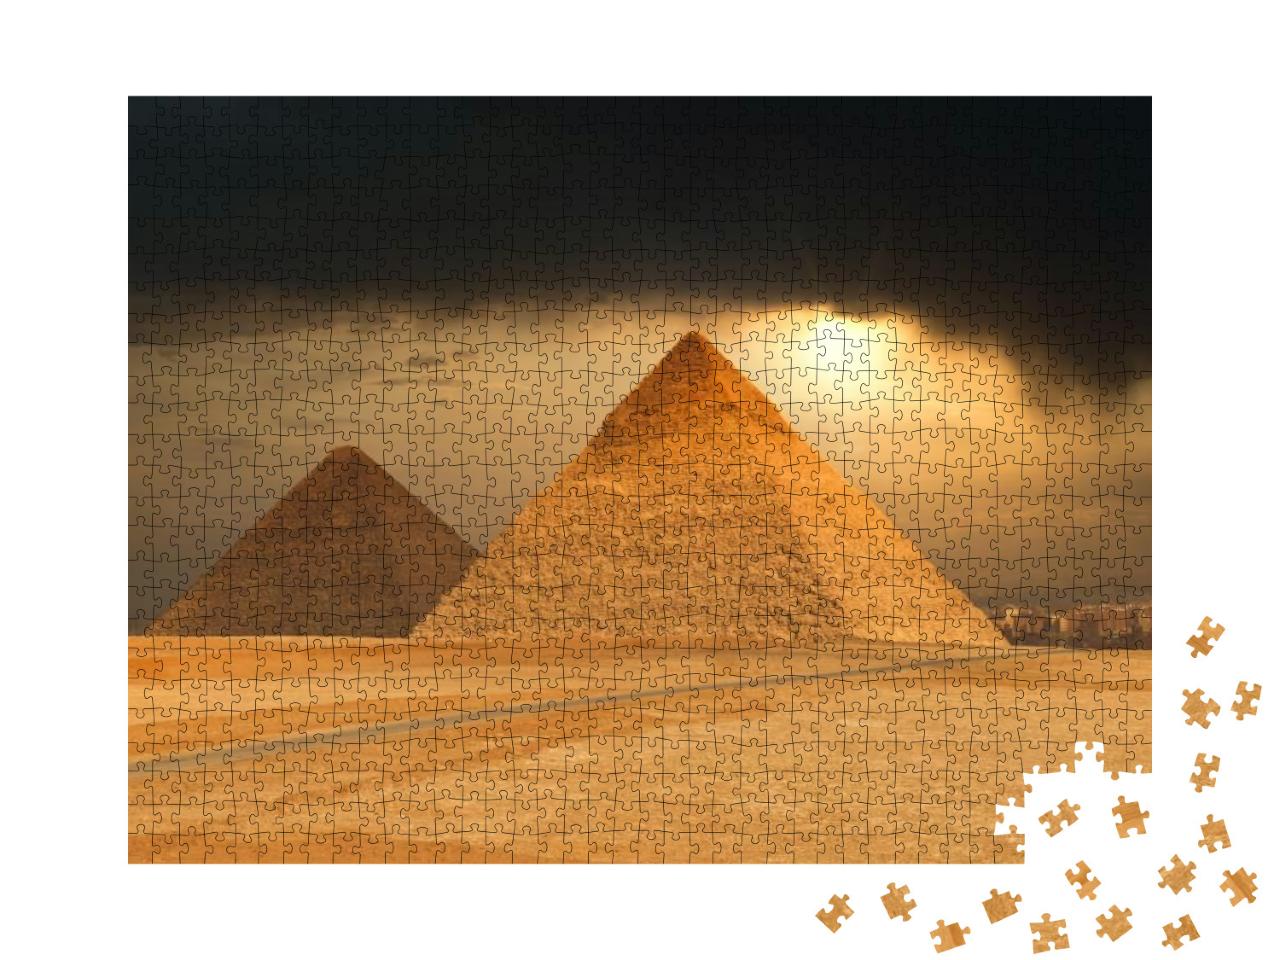 The Famous Pyramids At Giza in Egypt... Jigsaw Puzzle with 1000 pieces